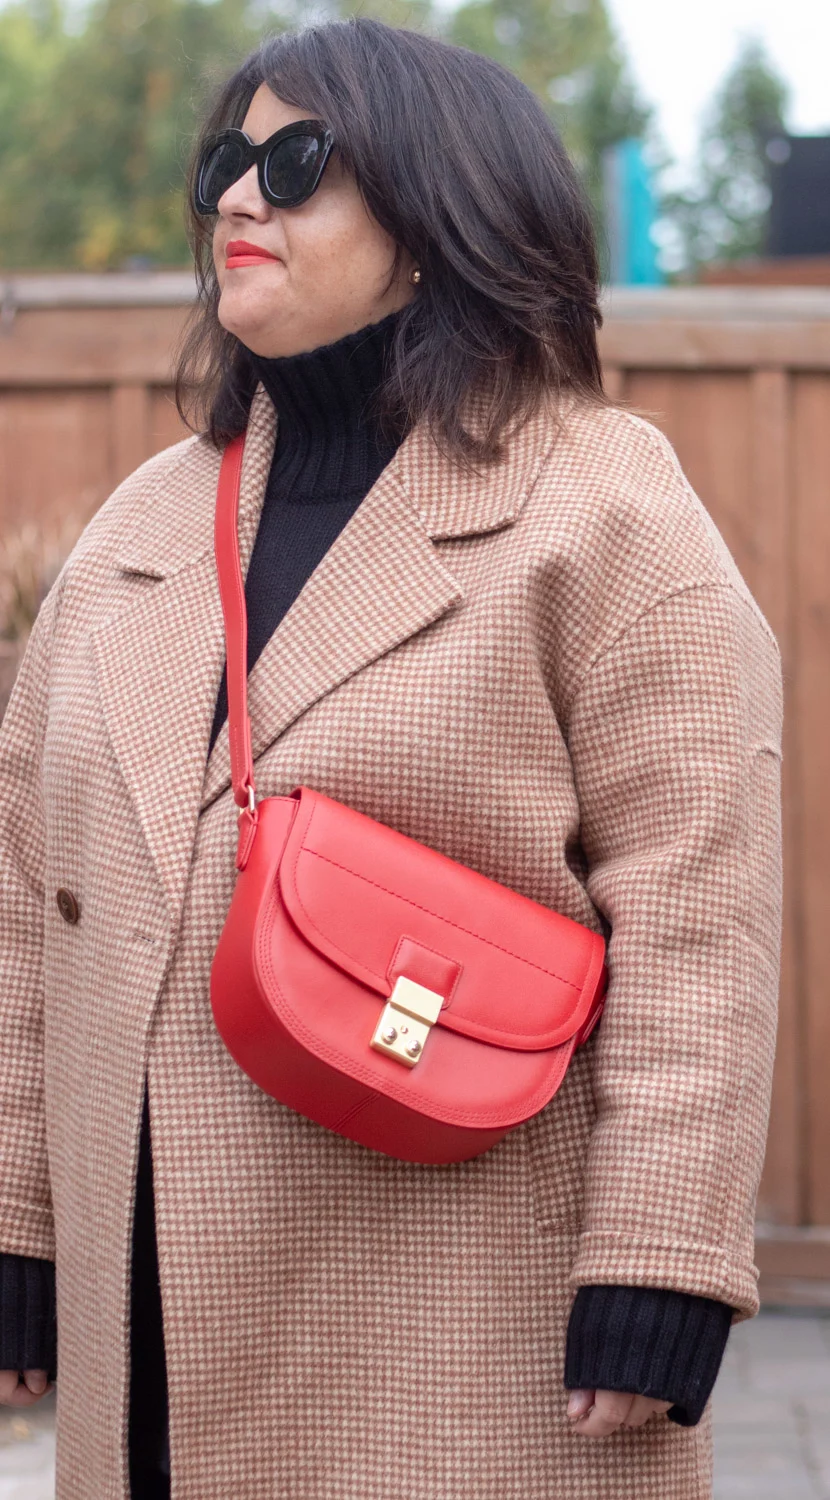 curated london coat, red bag